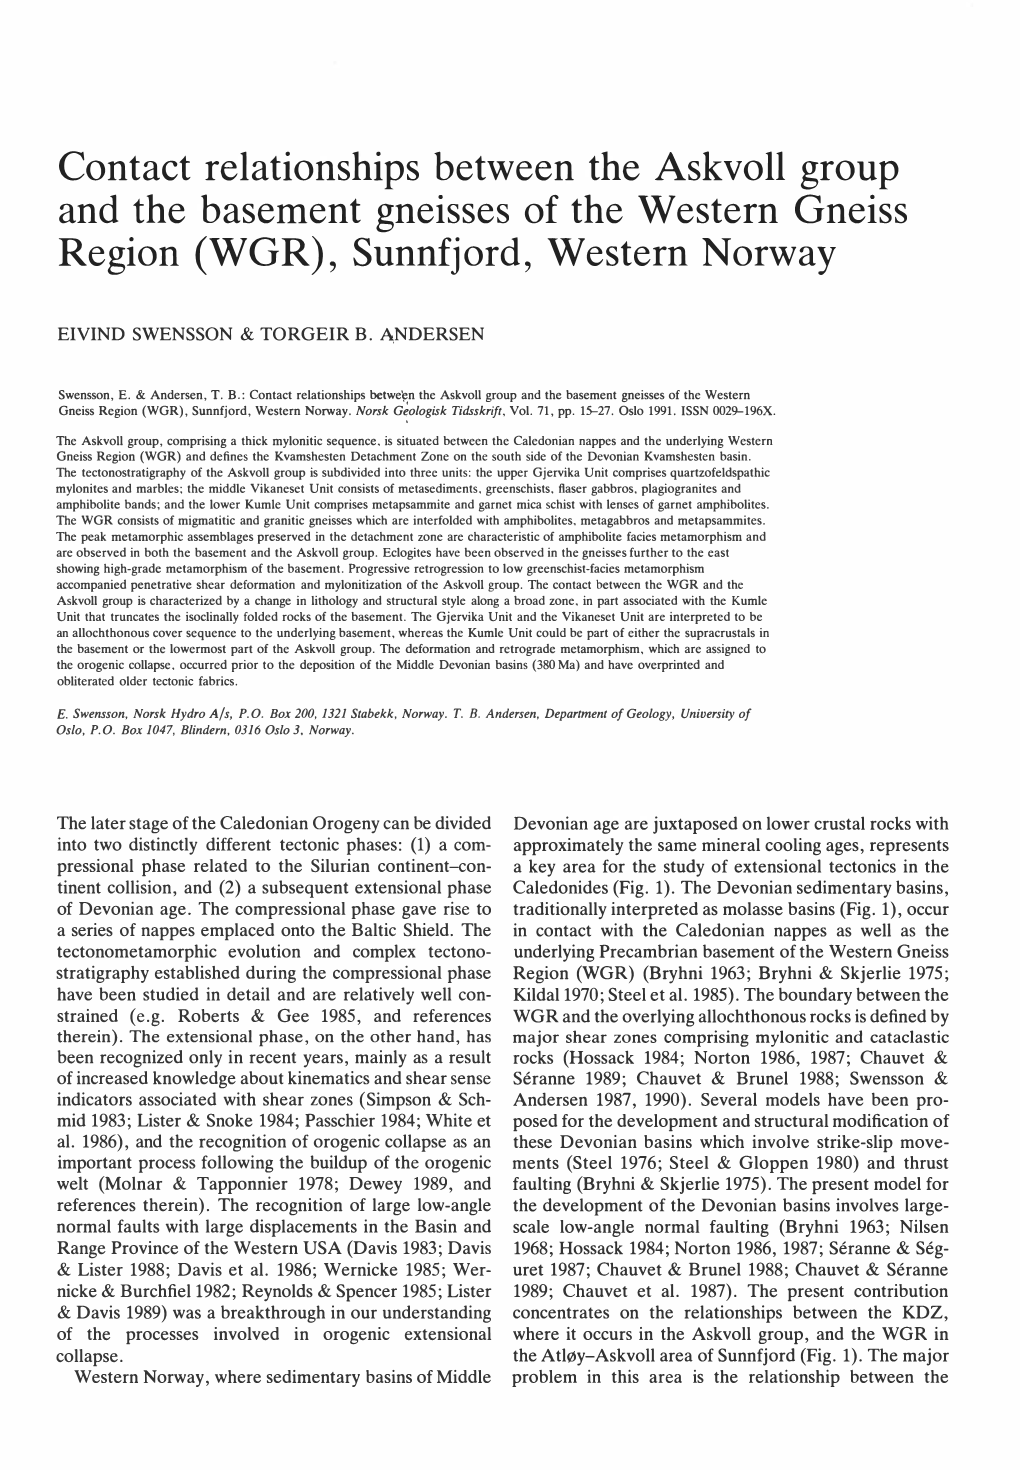 Contact Relationships Between the Askvoll Group and the Basement Gneisses of the Western Gneiss Region (WGR) , Sunnfjord, Western Norway